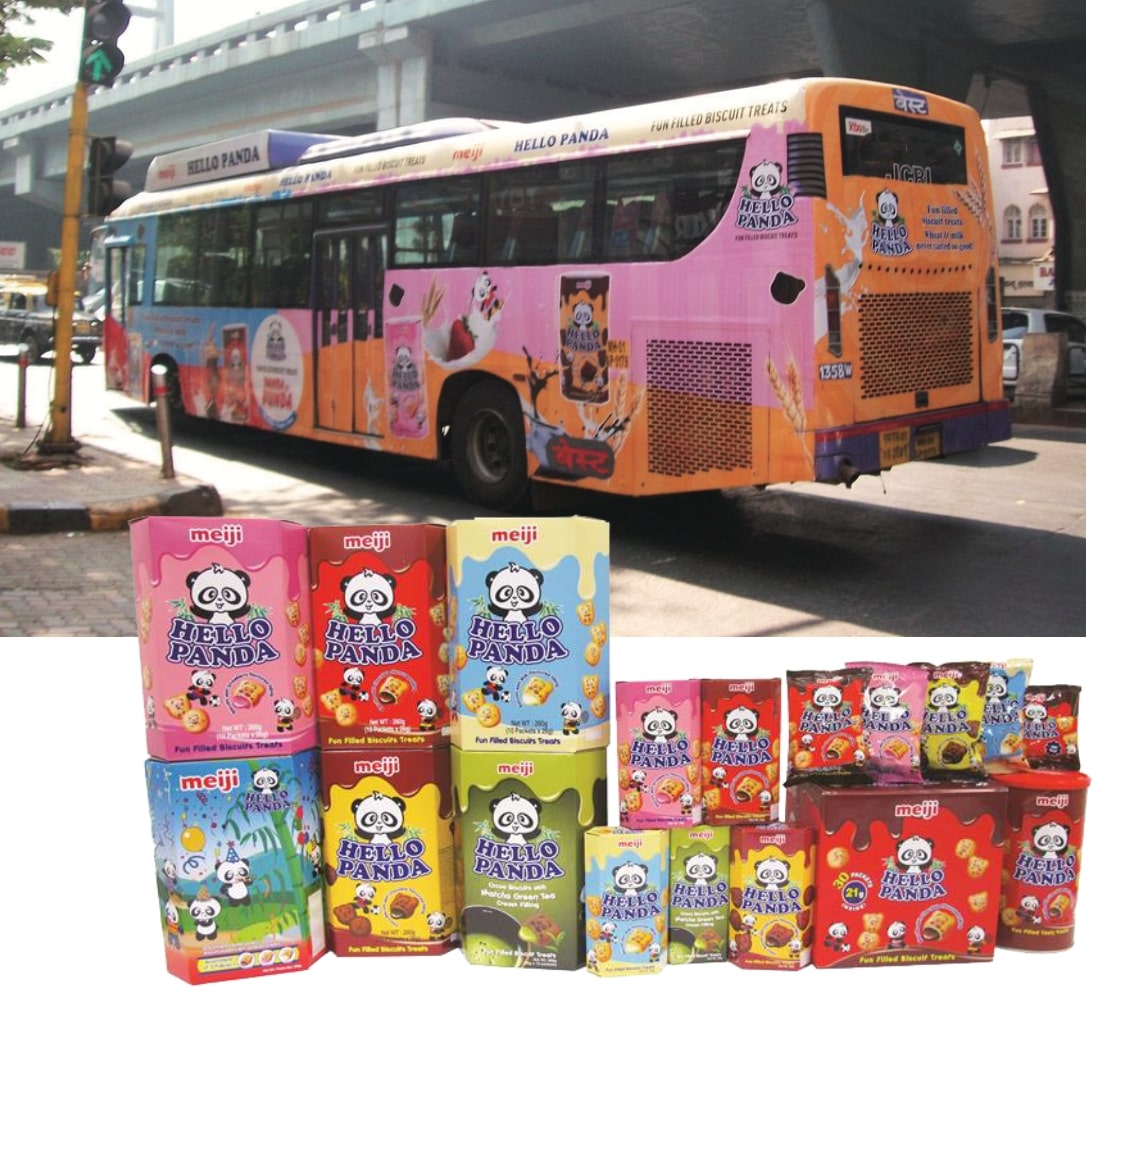 photo of Hello Panda brand products and its campaign bus